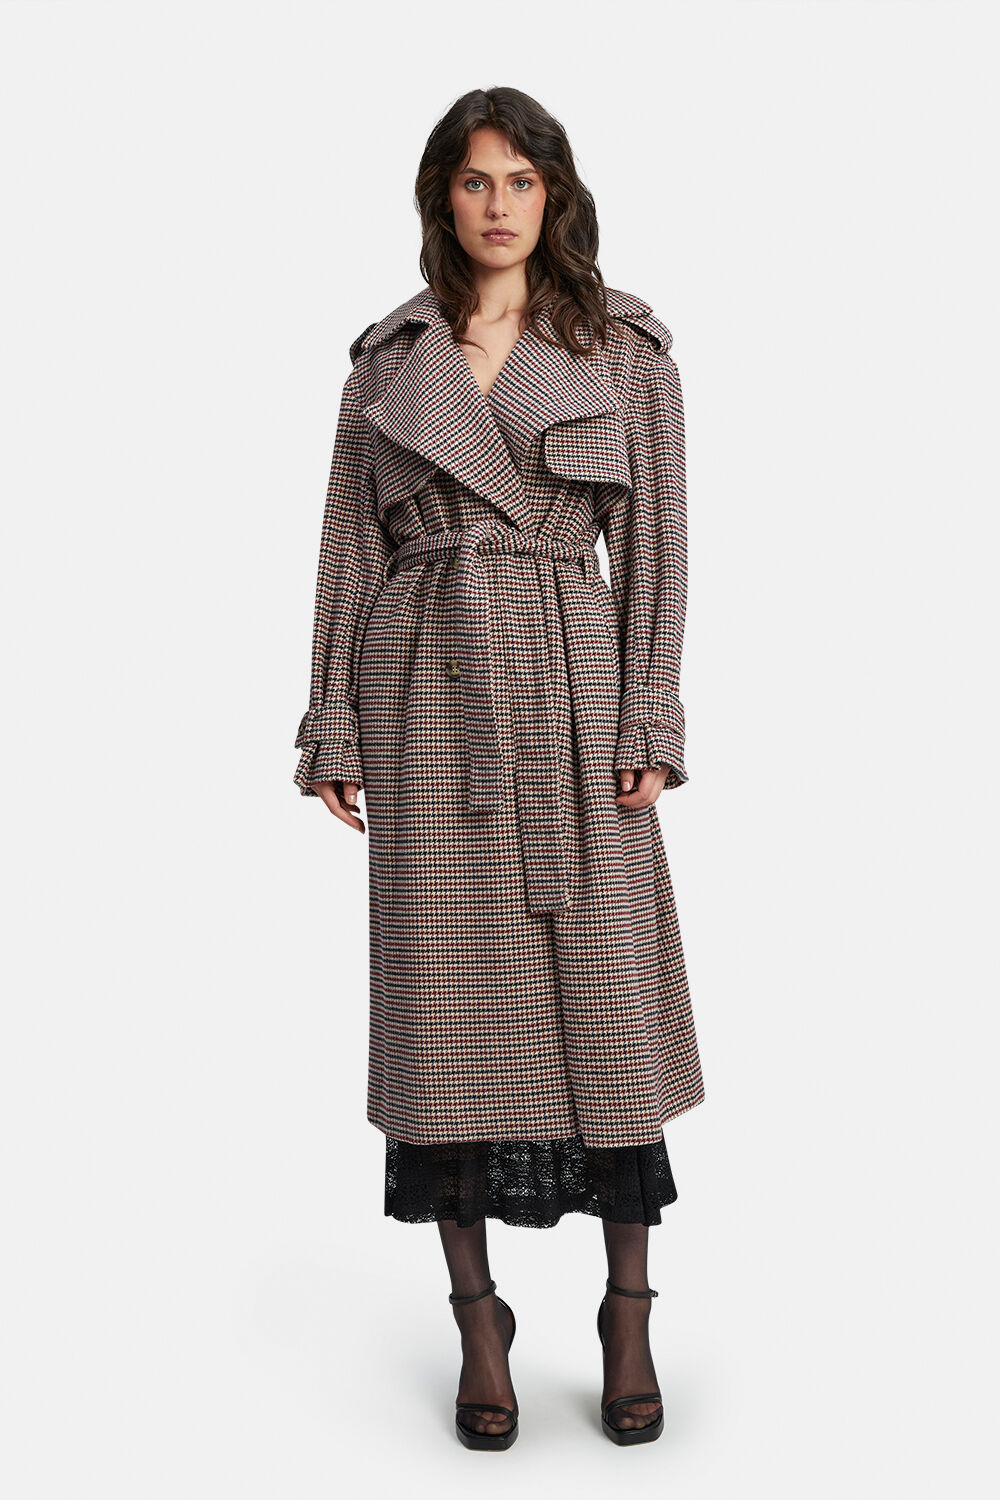 OVERSIZED CHECK TRENCH in colour CAVIAR